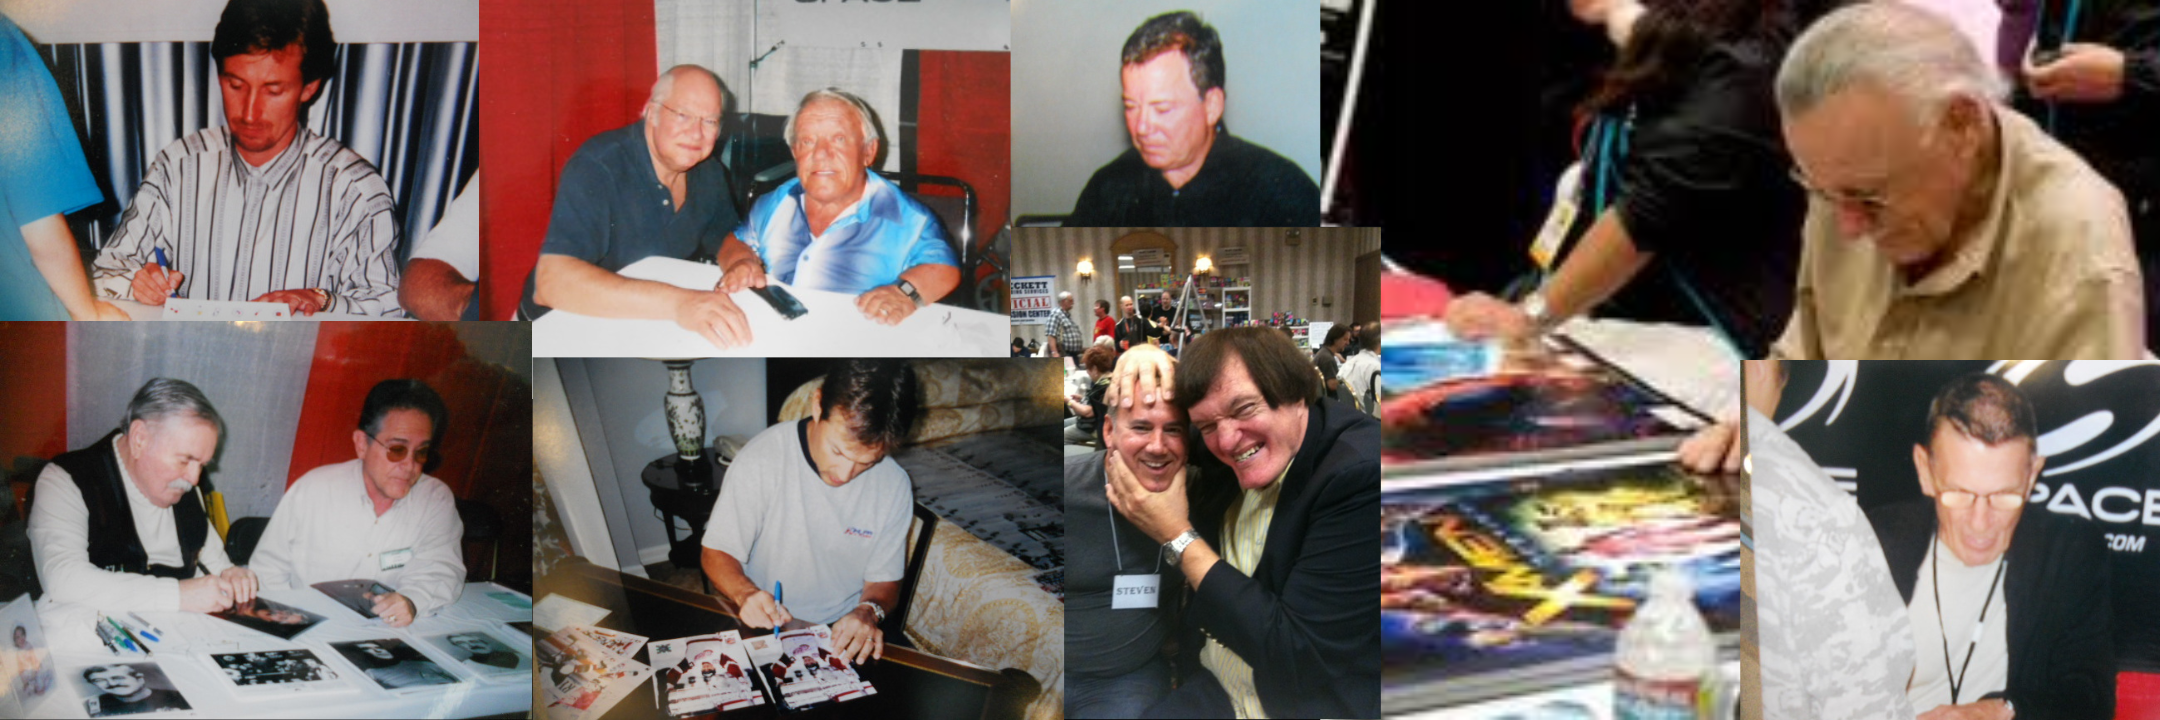 Collage of in-person autograph signings with Stan Lee, Kenny Baker, William Shatner, Wayne Gretzky, and Rickard Kiel